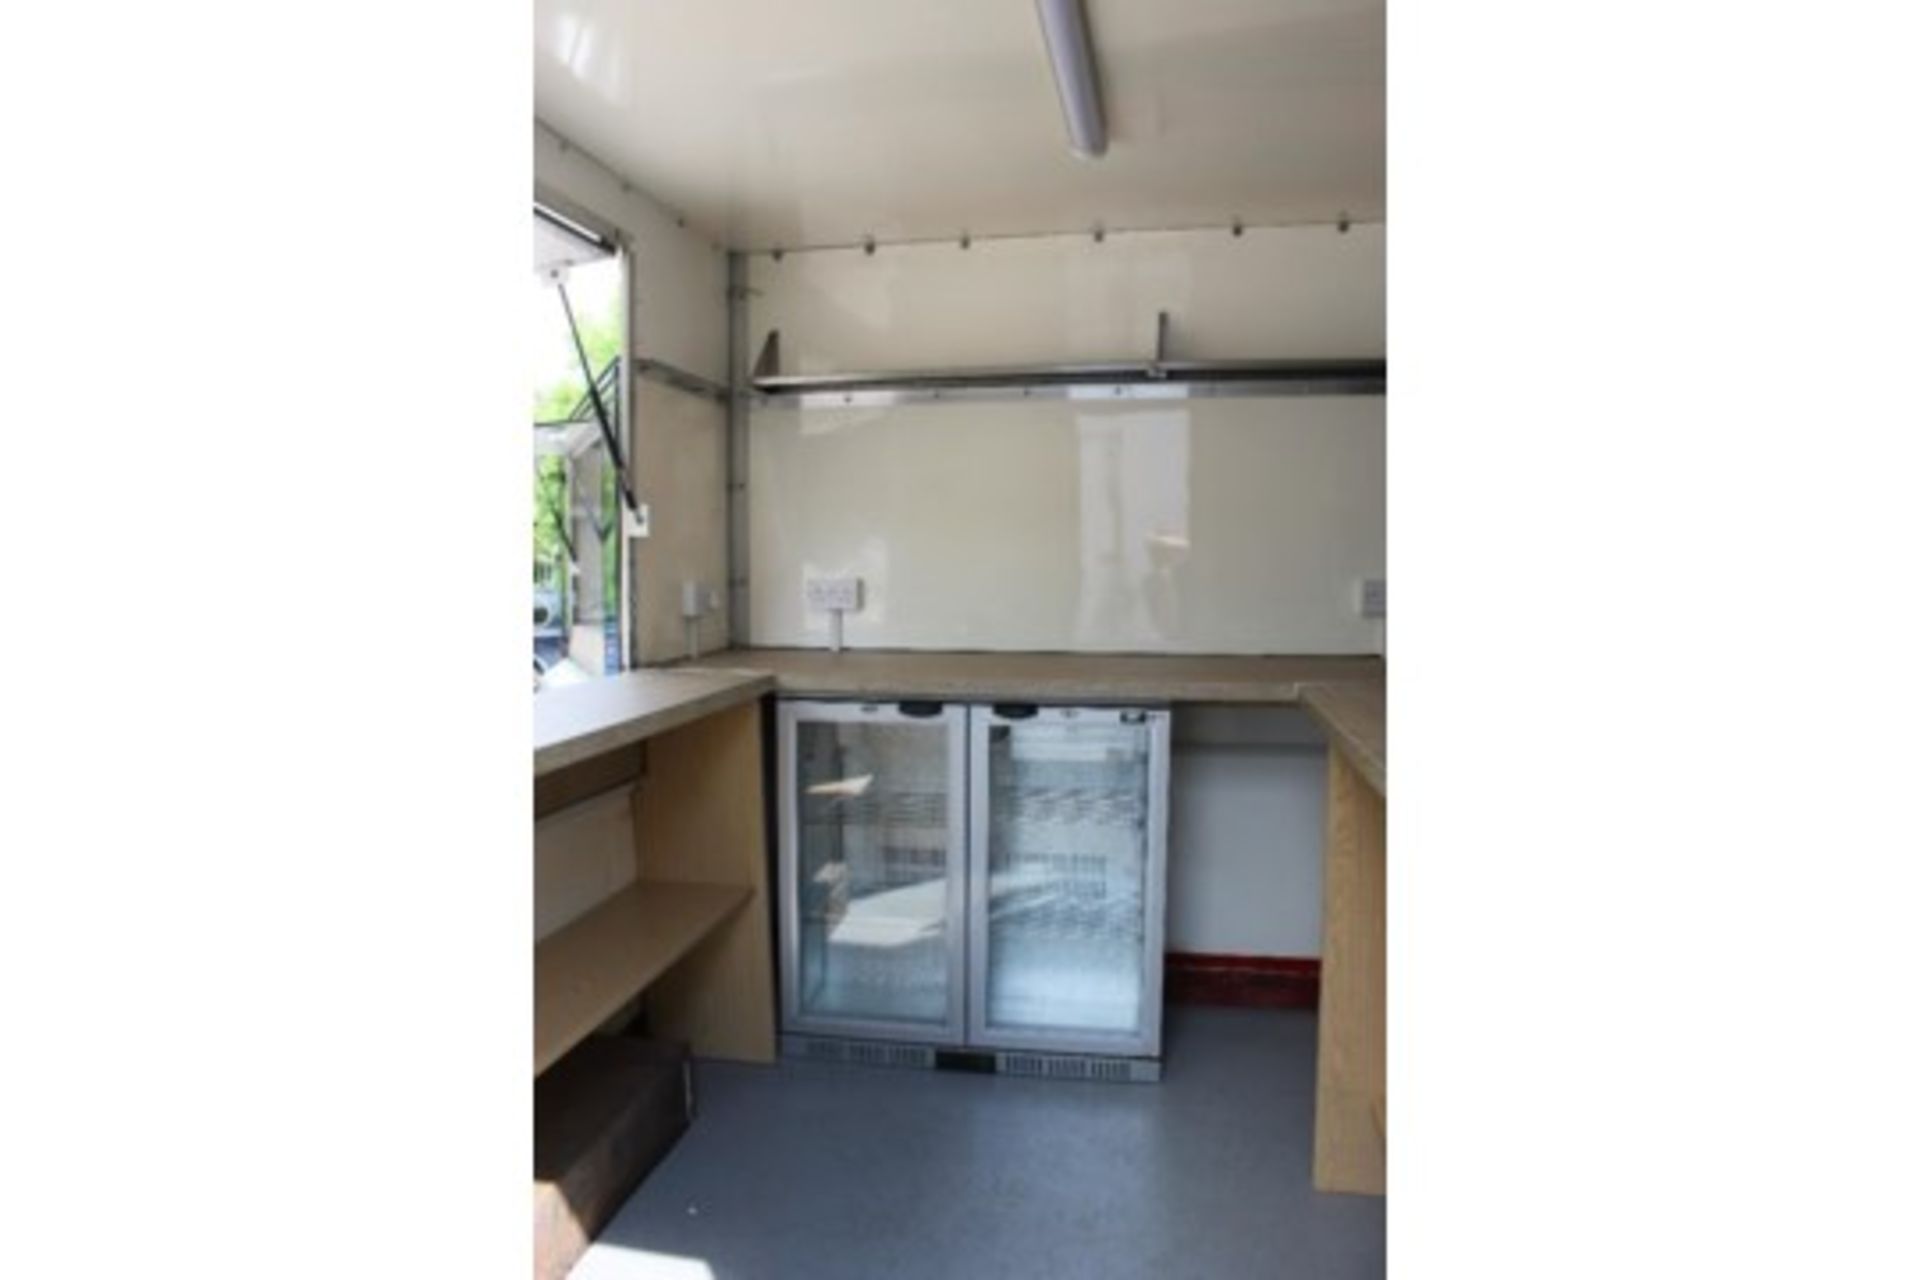 Catering Trailer – Black – 7ft x 5ft – Refurbished - NO VAT   Completely re-wired: New fuse box - Image 4 of 7